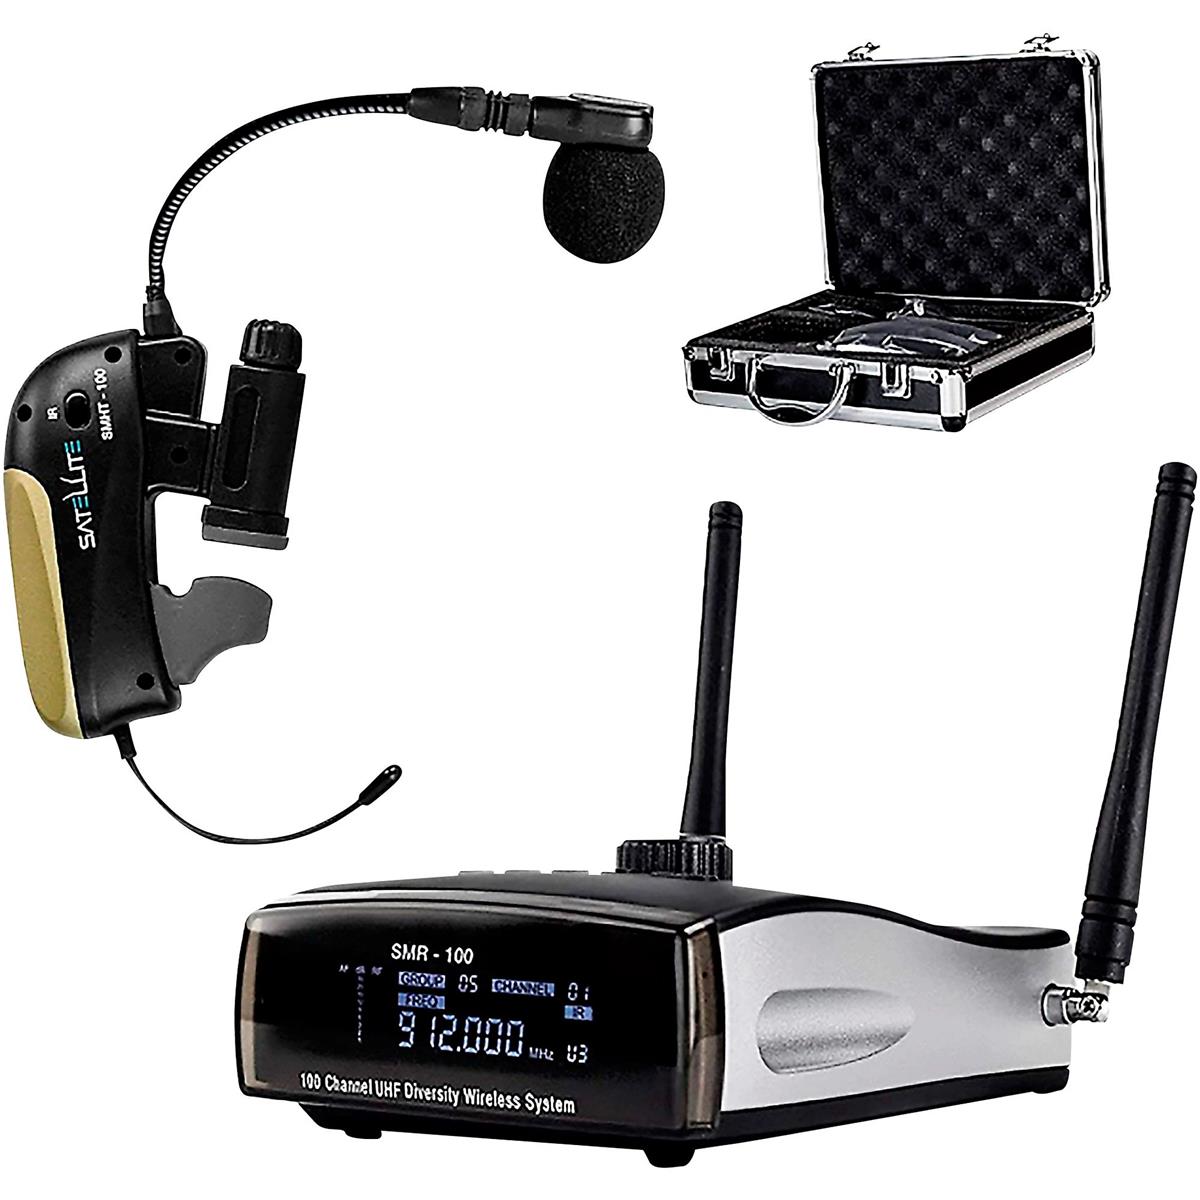 Image of Nady Satellite 100-Channel True Diversity Wireless Instrument System for Horns